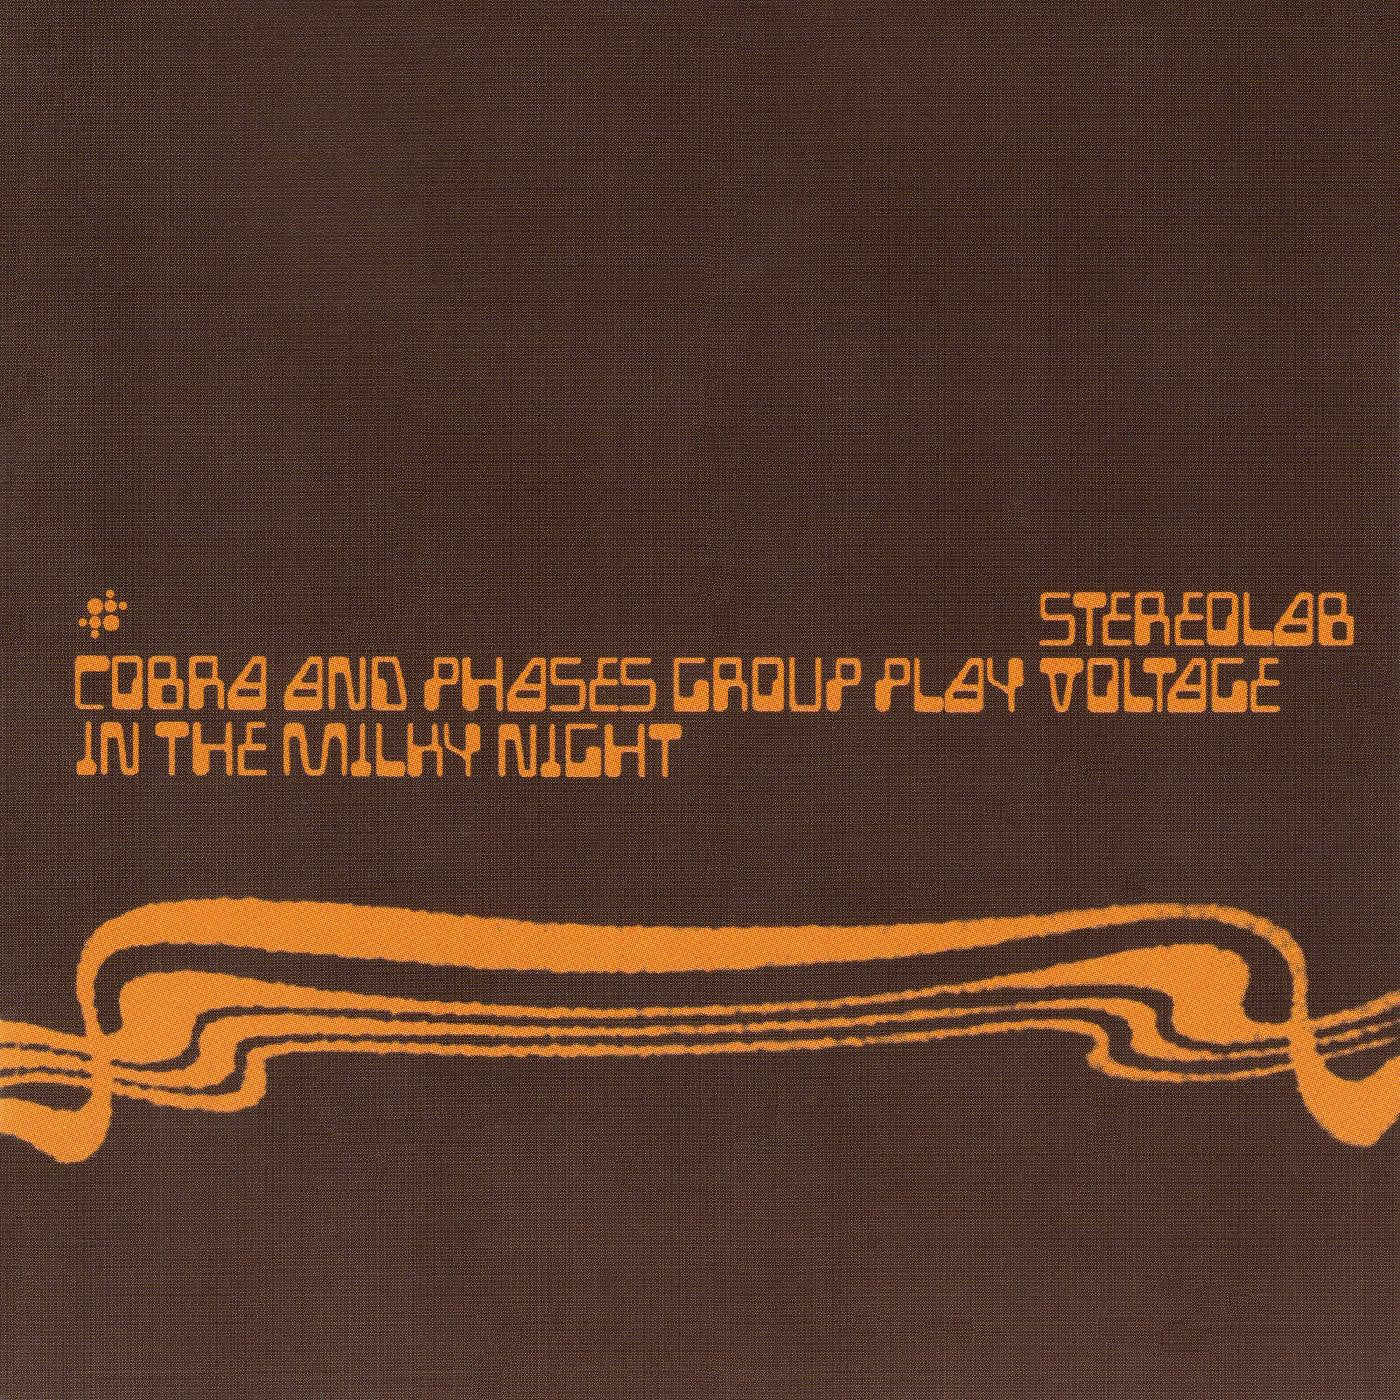 STEREOLAB - COBRA AND PHASES GROUP PLAY VOLTAGE Vinyl 3xLP